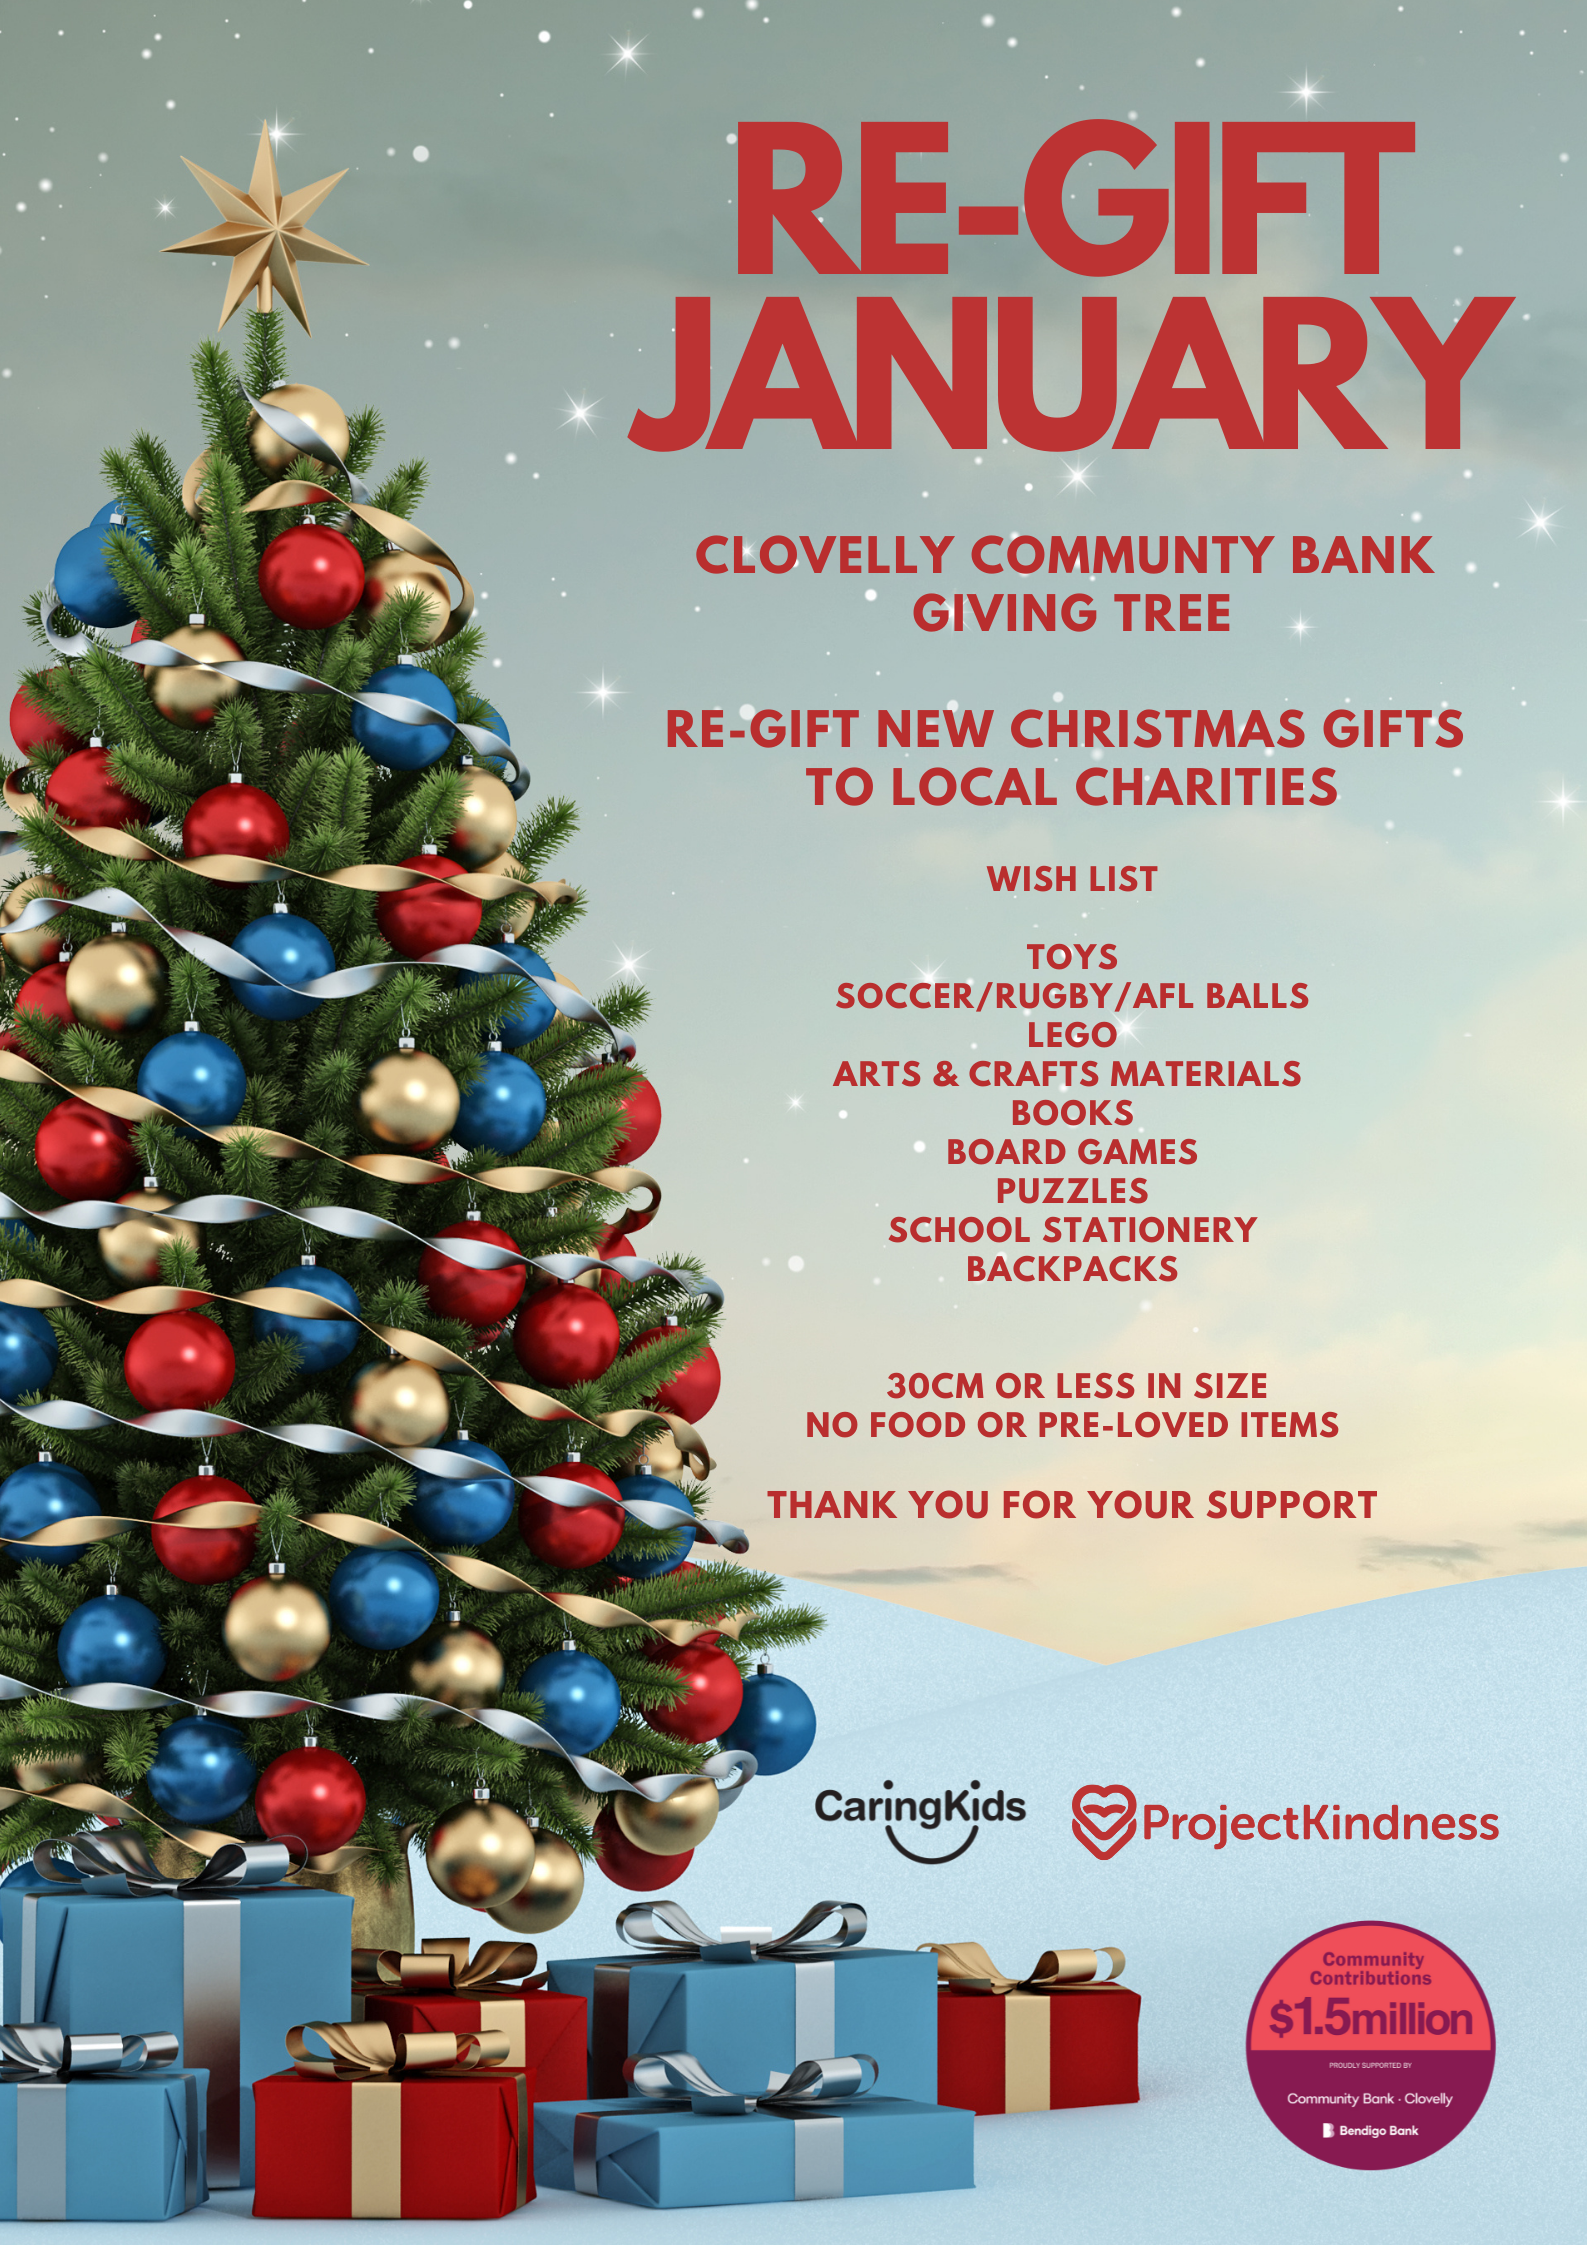 Re-Gift your Christmas toys in January at the Clovelly Community Bank